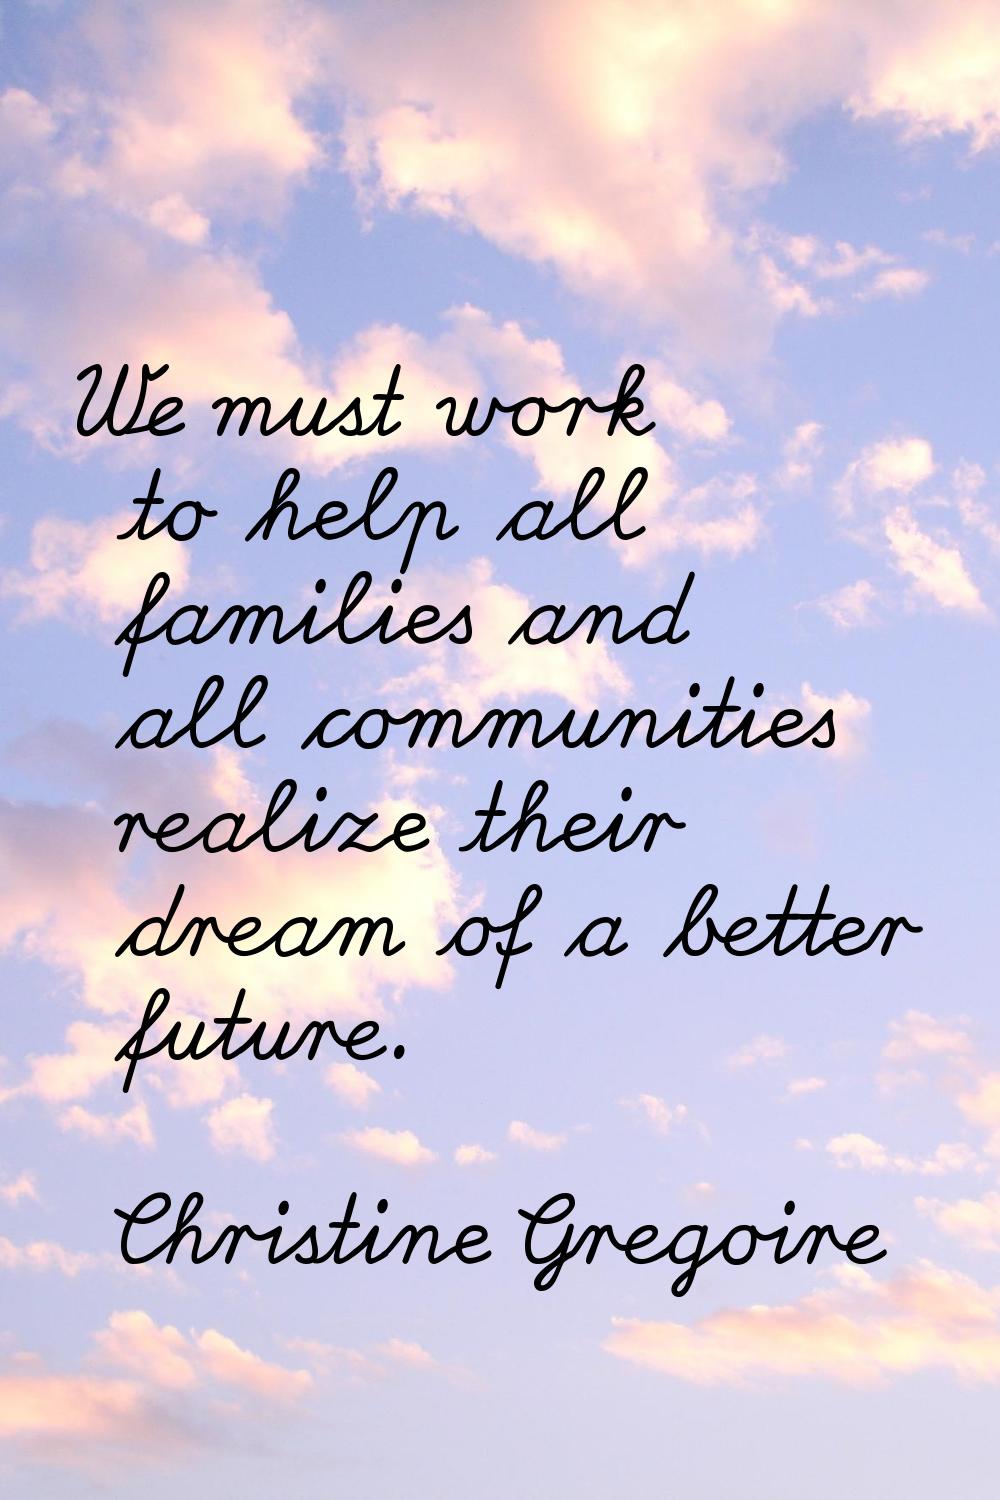 We must work to help all families and all communities realize their dream of a better future.